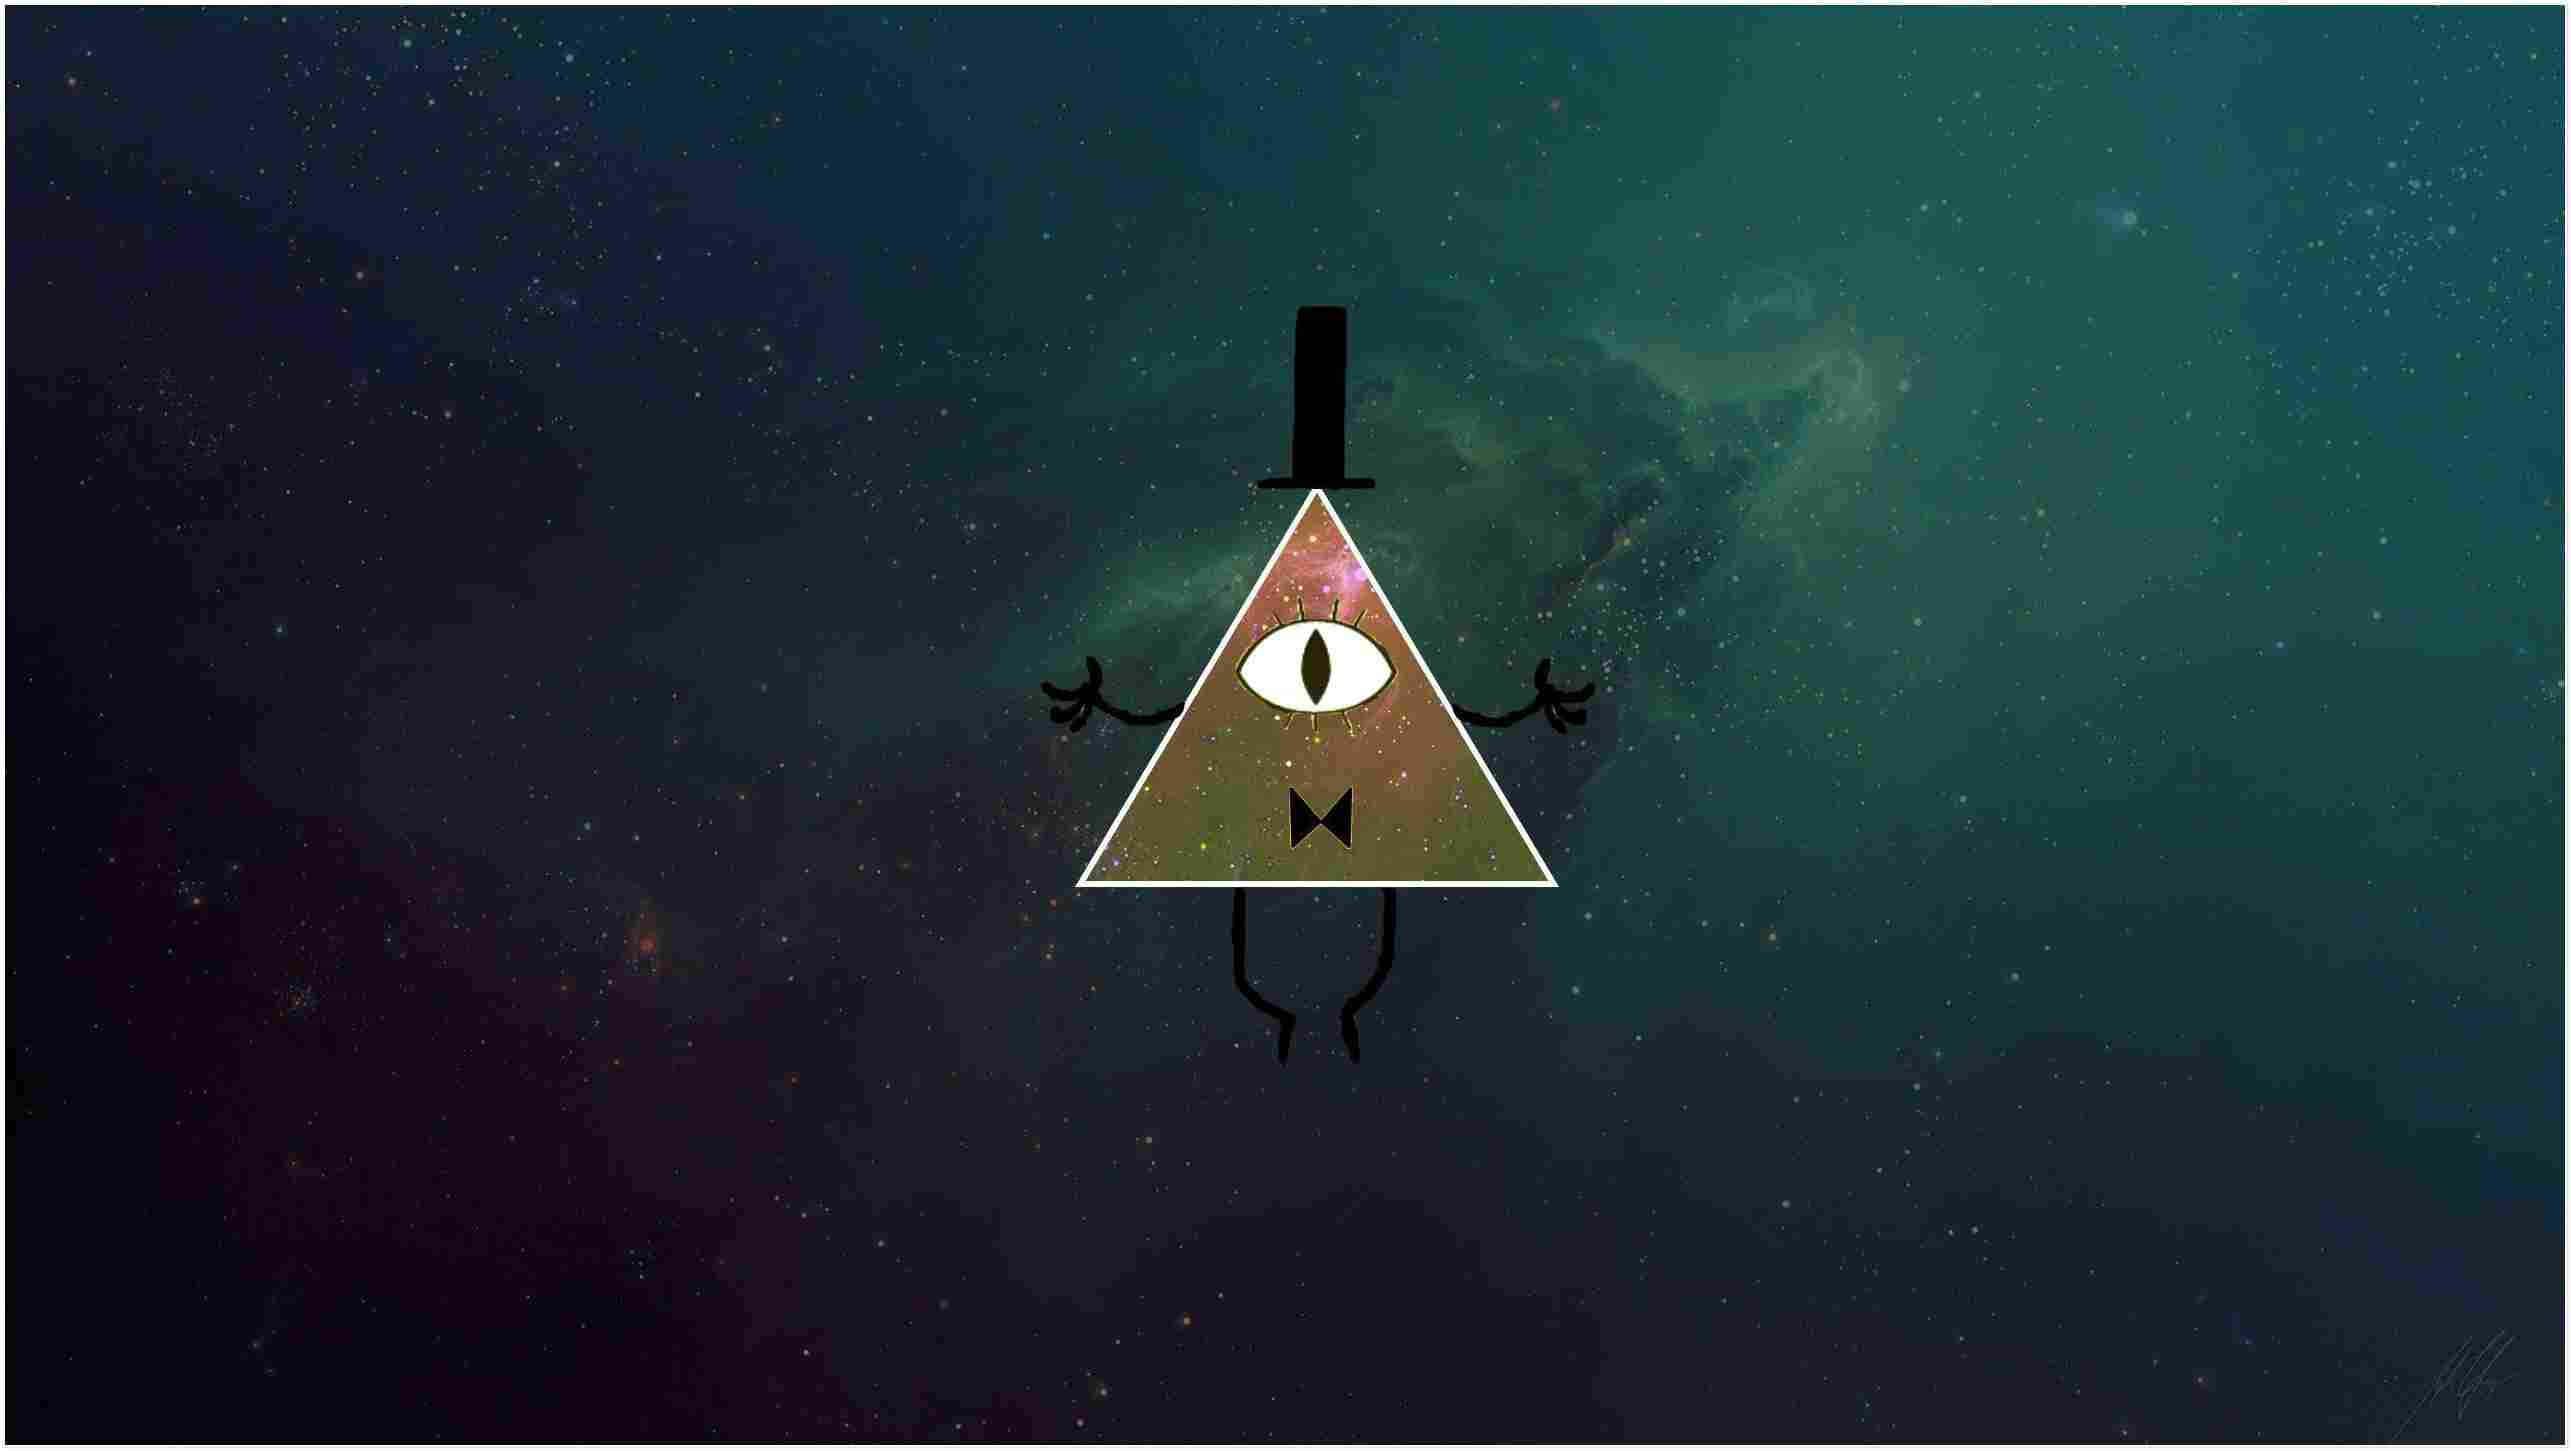 Welcome to Gravity Falls, where secrets are everywhere.